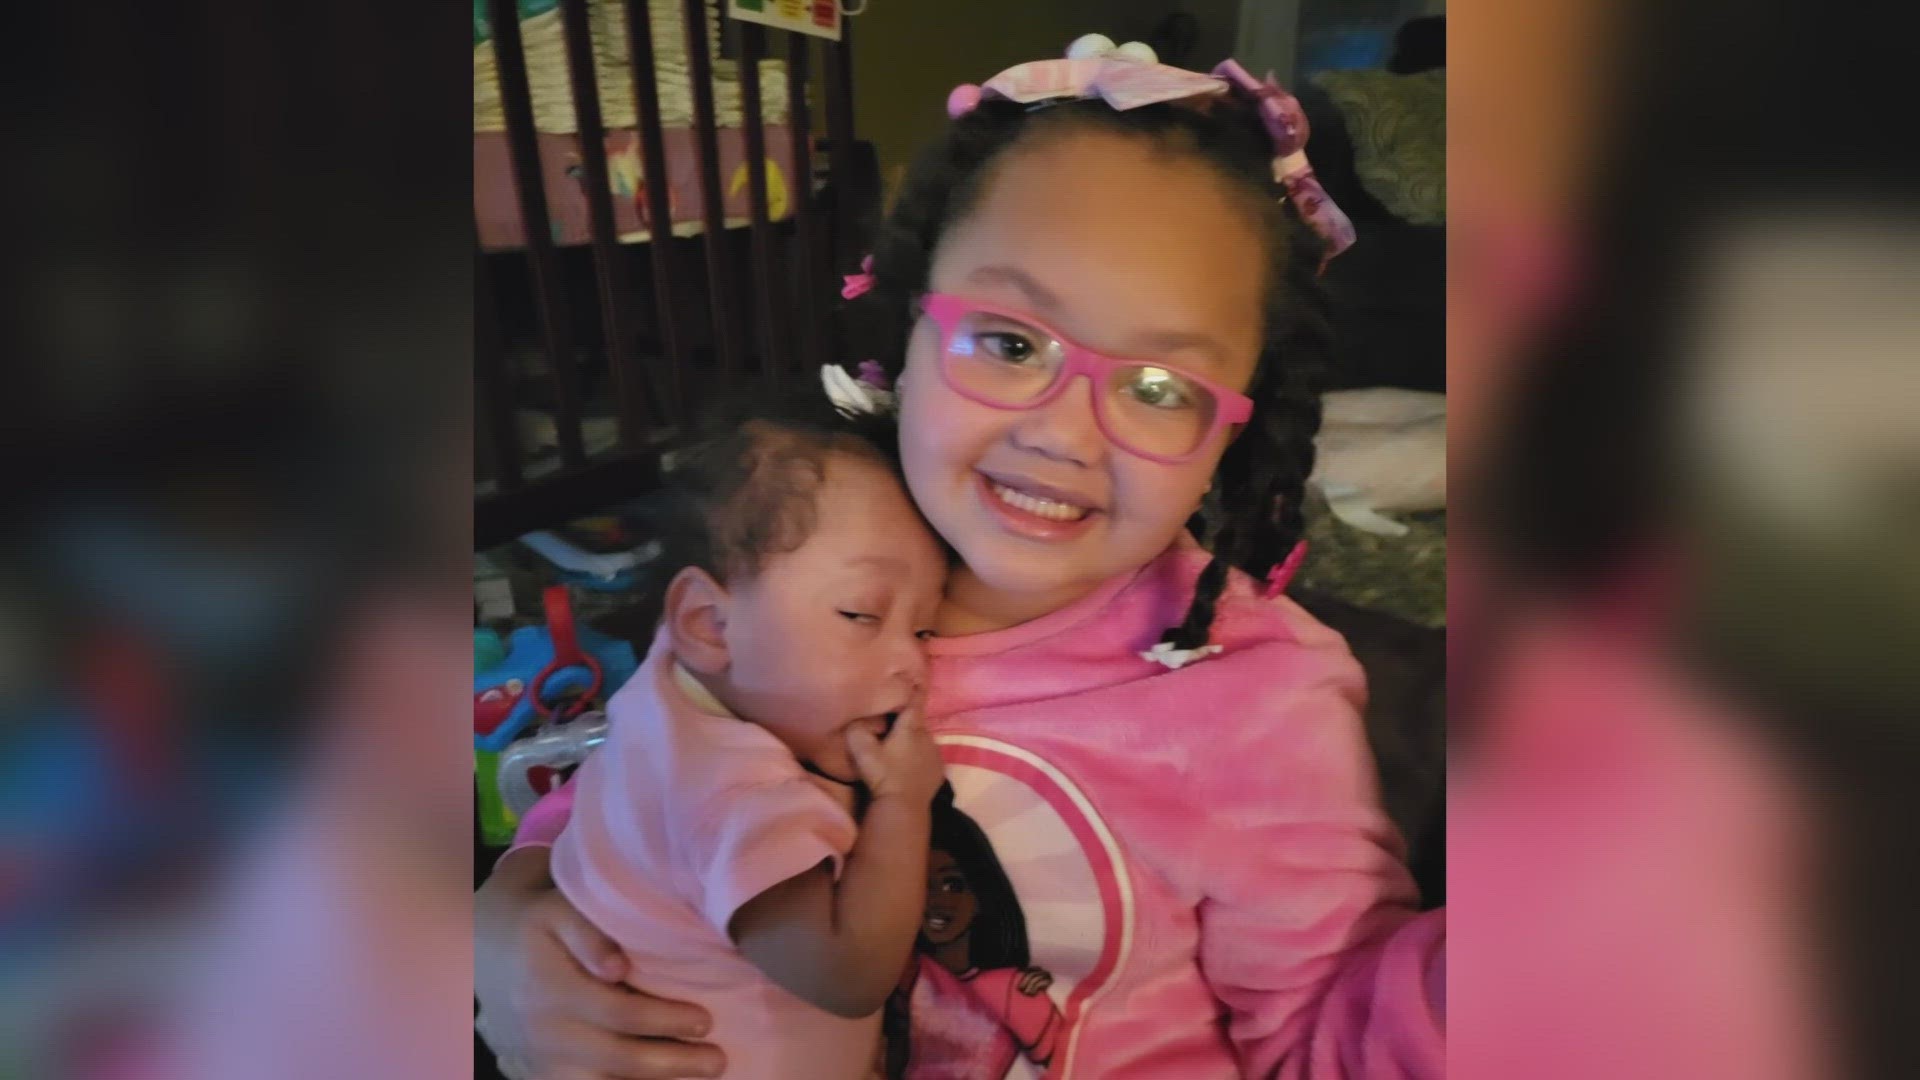 A mother from Knoxville said her 5-year-old helped save her baby's life when the alarm went off and notified her that she had stopped breathing.